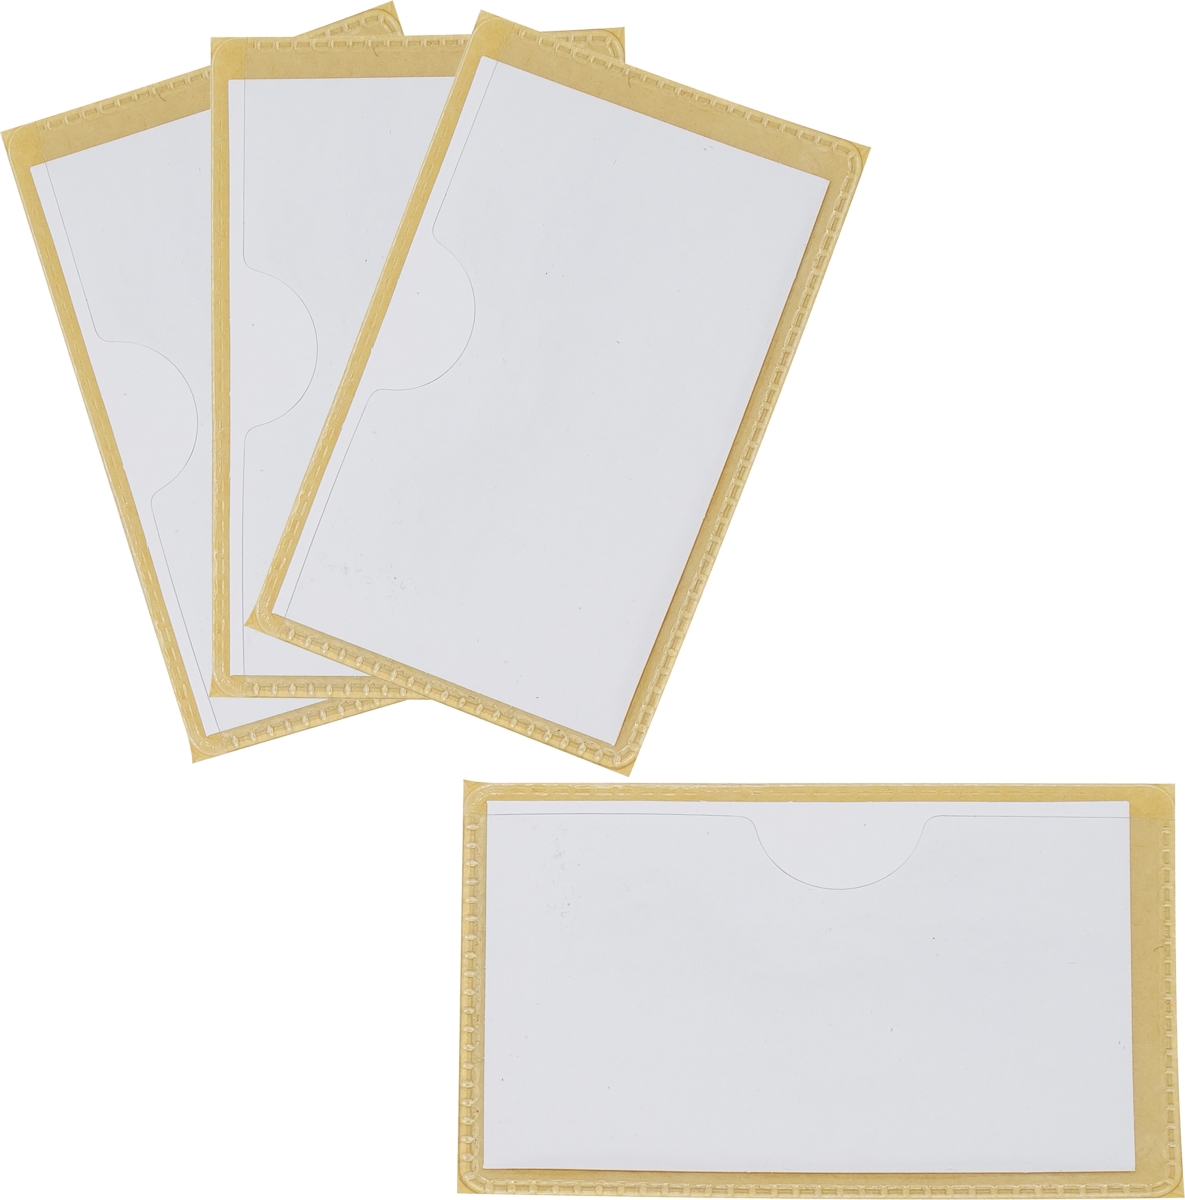 70100u01c 2 X 3 In. Label Pockets With Adhesive Backing, Clear - Pack Of 6